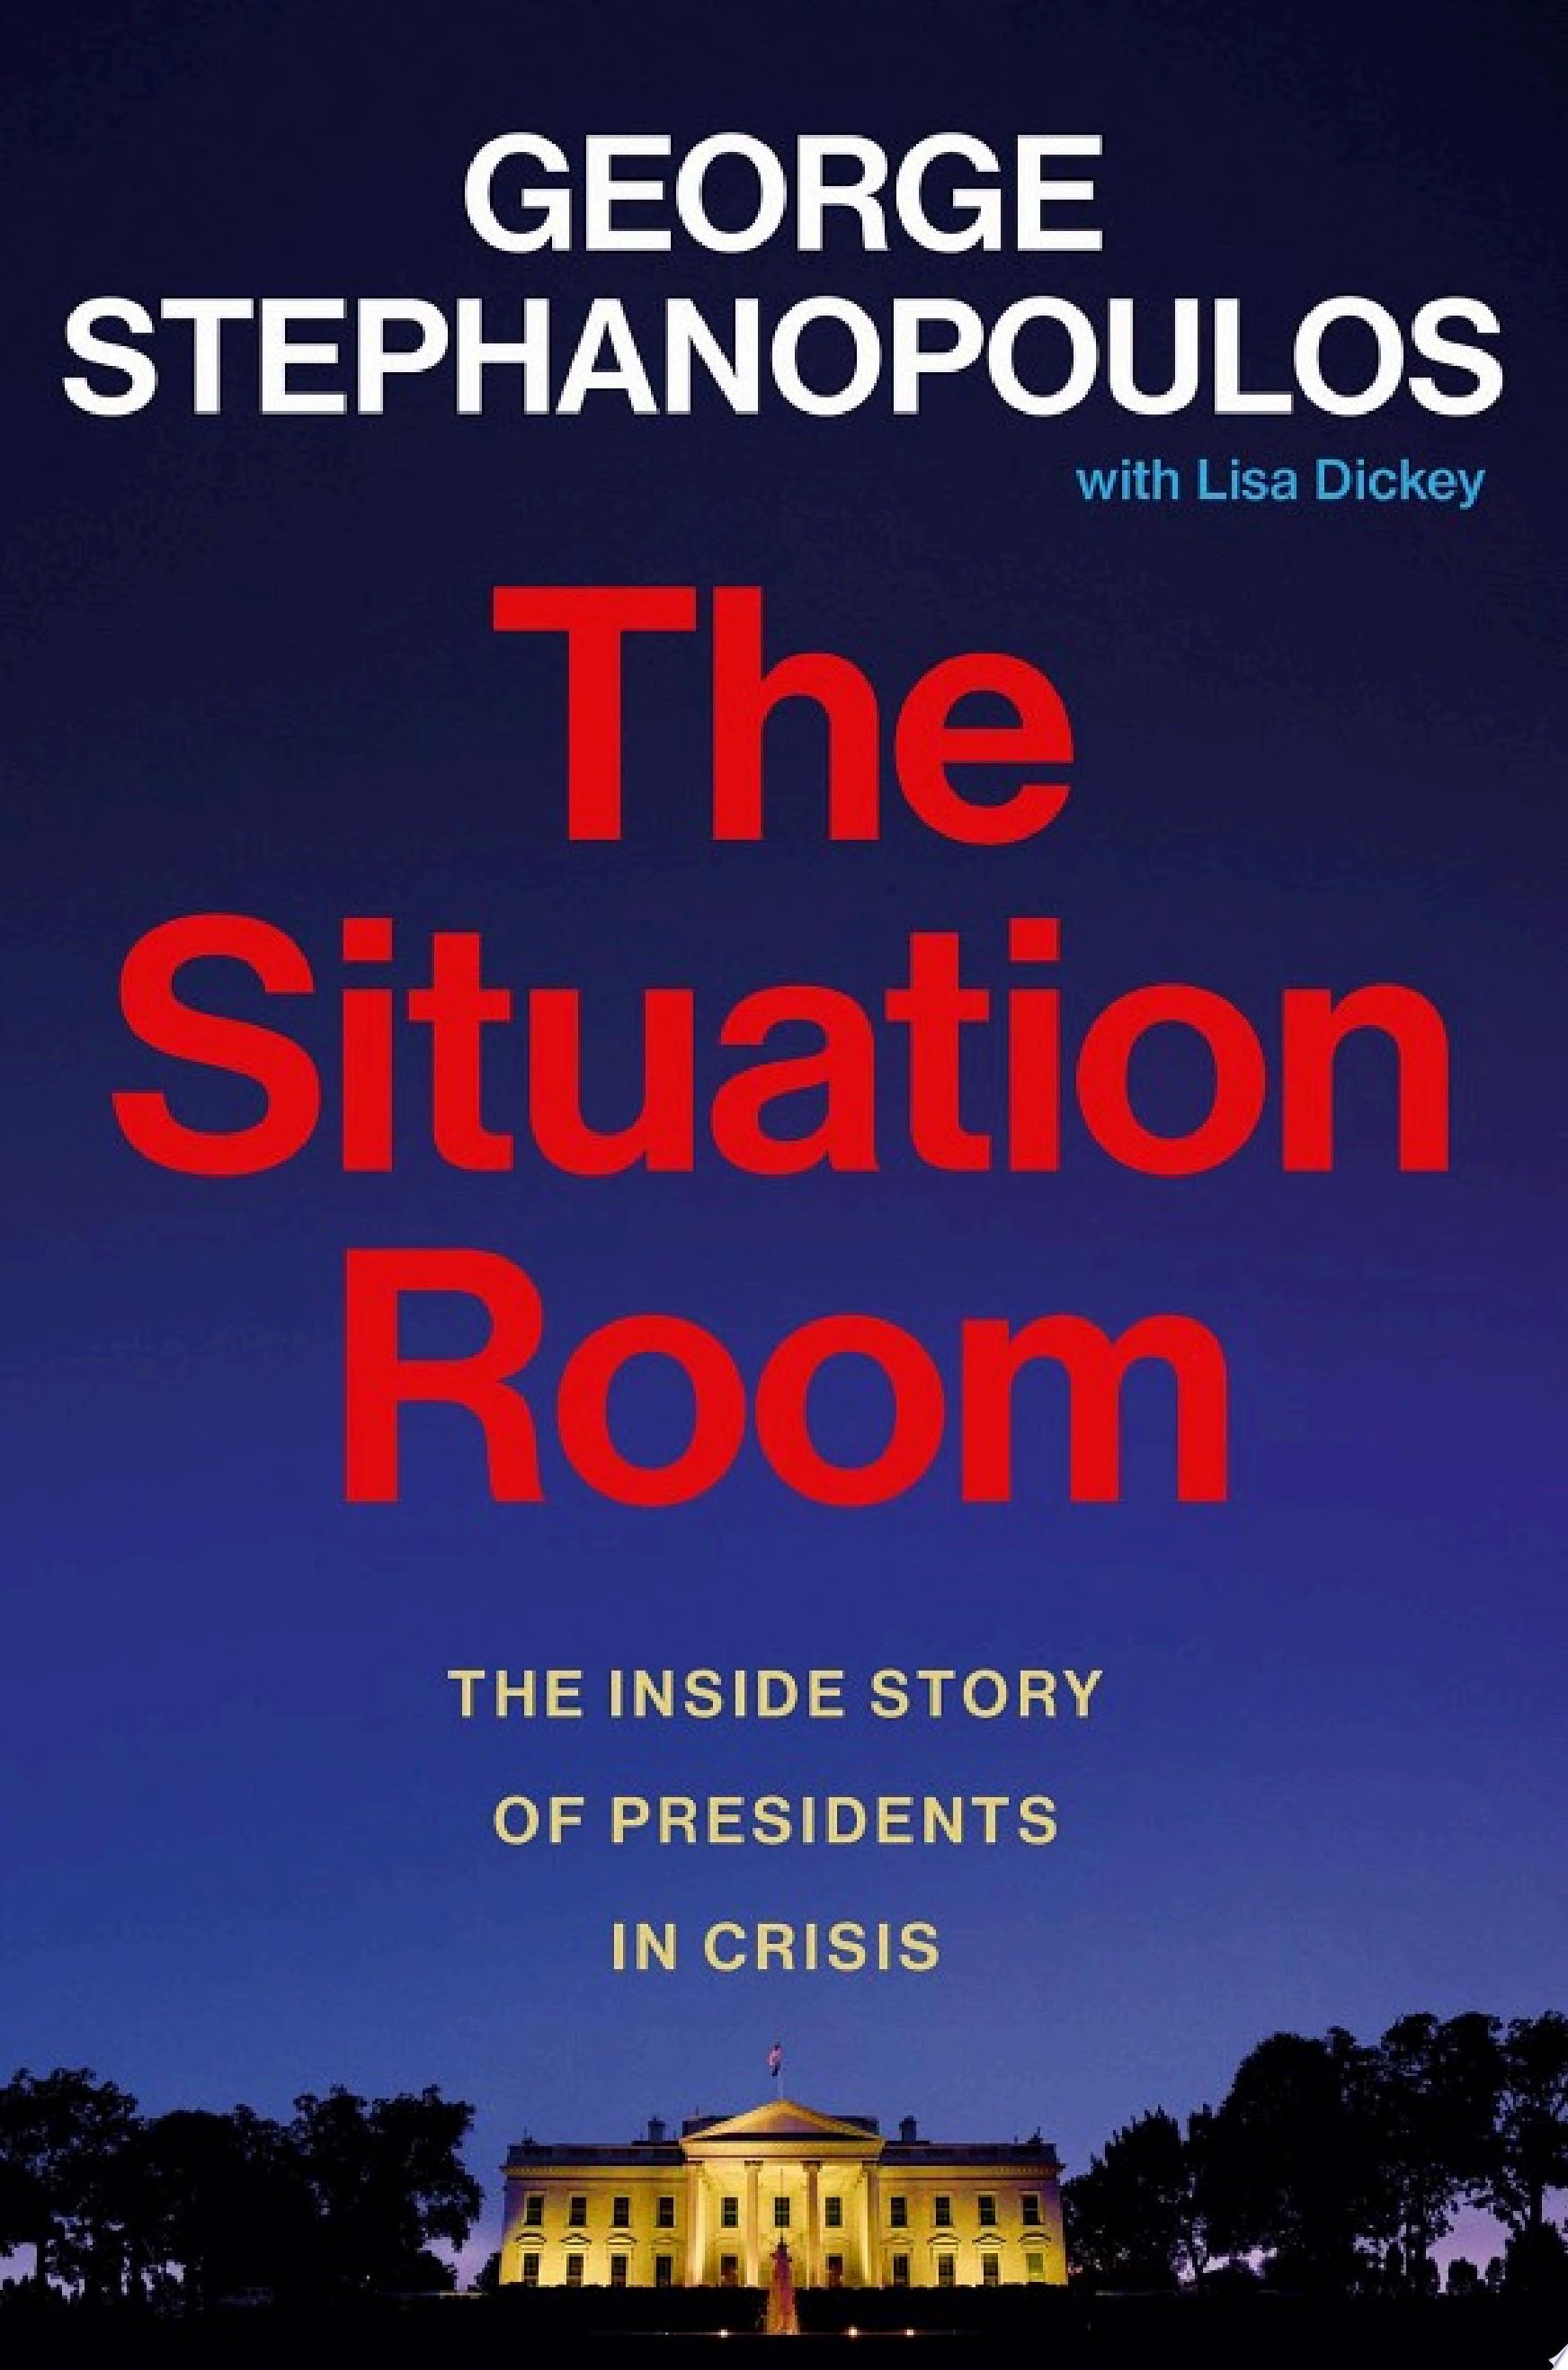 Image for "The Situation Room"